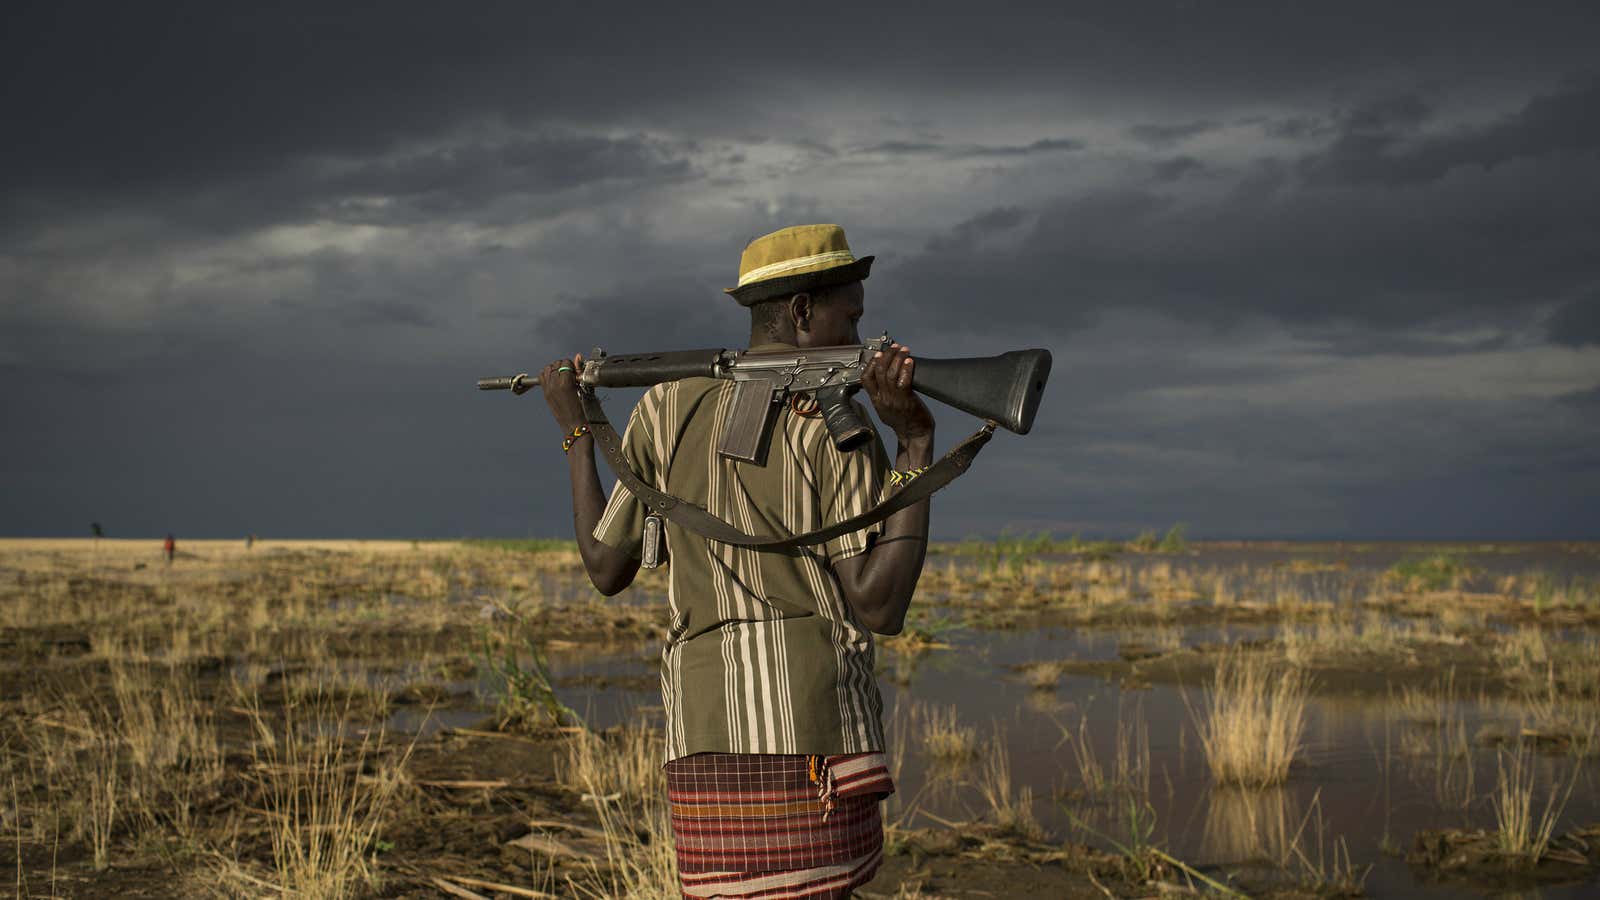 A drying Lake Turkana has caused tensions between communities fighting over its resources.